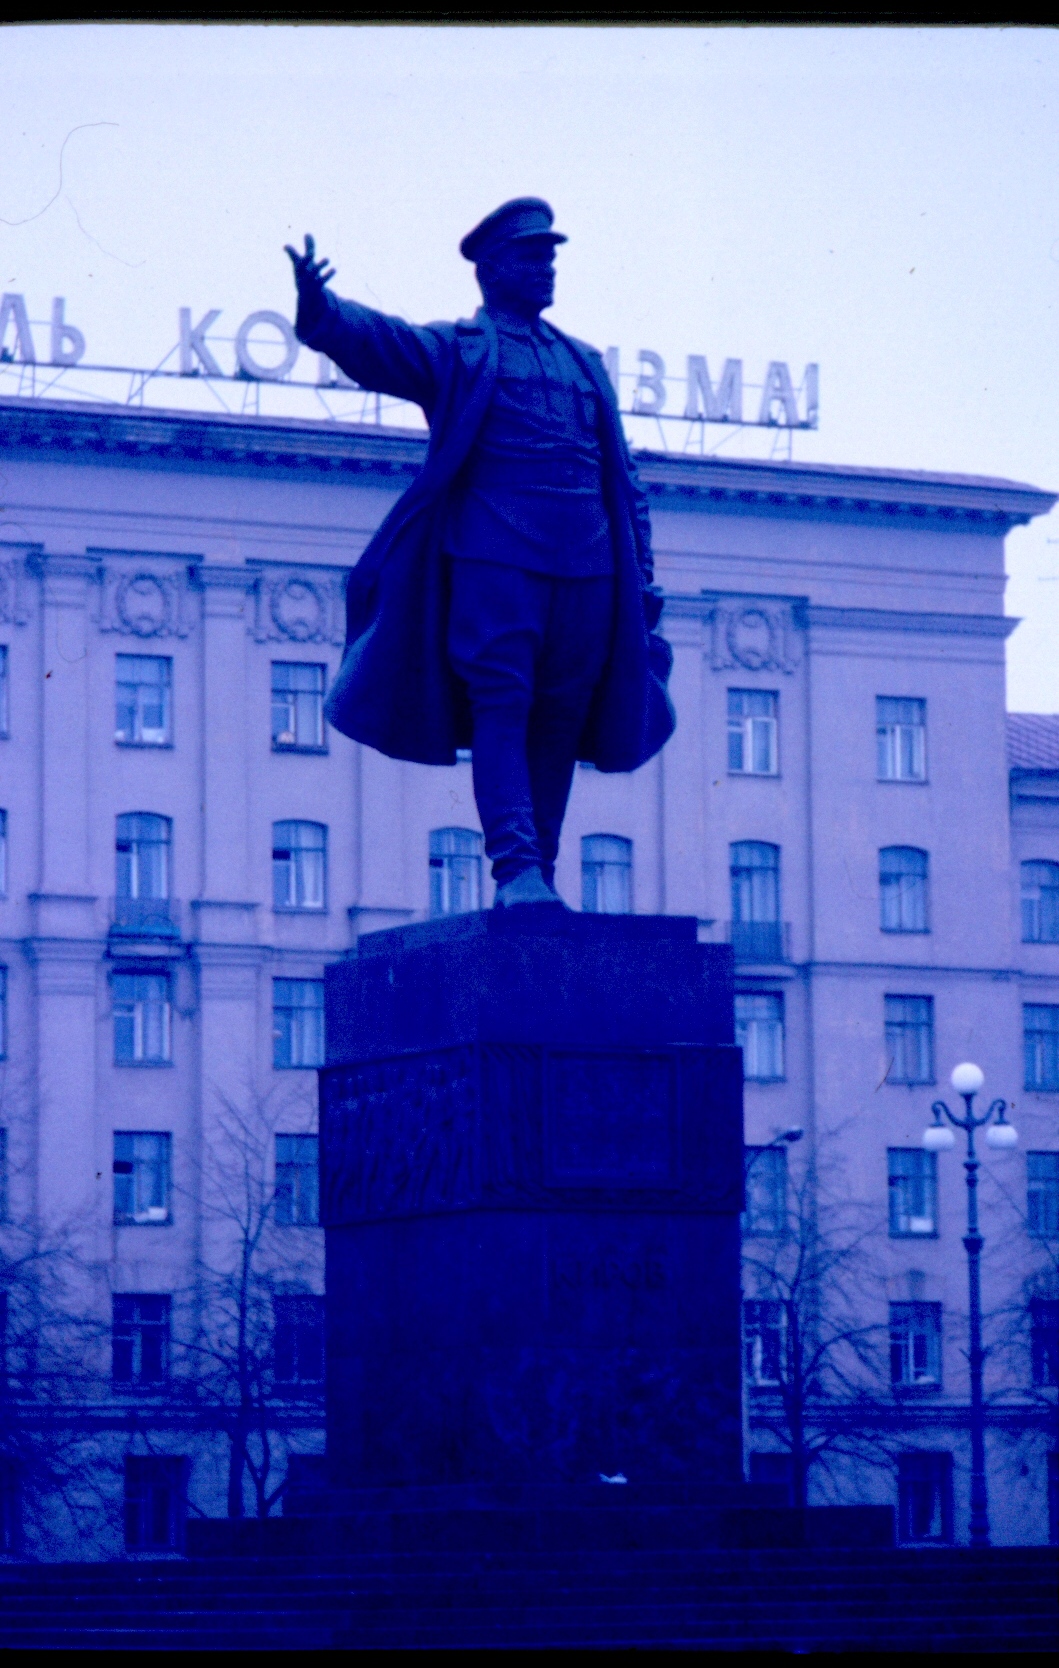 the large statue stands outside a tall building